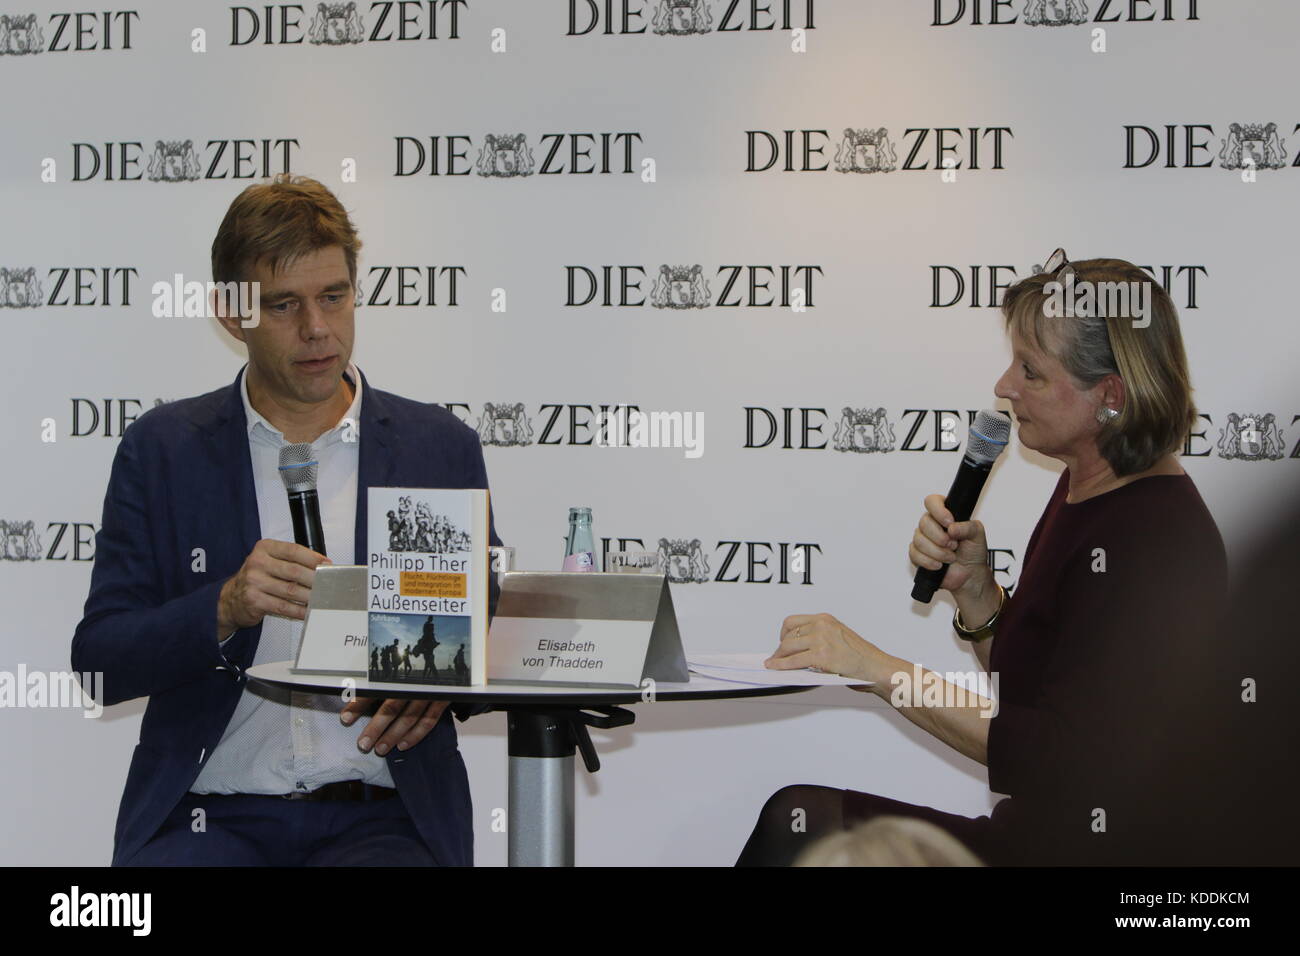 Frankfurt, Germany. 12th Oct, 2017. Austrian historian Philipp Ther gives an interview with the journalist Elisabeth von Thadden at the booth of the German national weekly newspaper Die Zeit at the Frankfurt Book Fair. The Frankfurt Book Fair 2017 is the world largest book fair with over 7,000 exhibitors and over 250,000 expected visitors. It is open from the 11th to the 15th October with the last two days being open to the general public. Credit: Michael Debets/Pacific Press/Alamy Live News Stock Photo